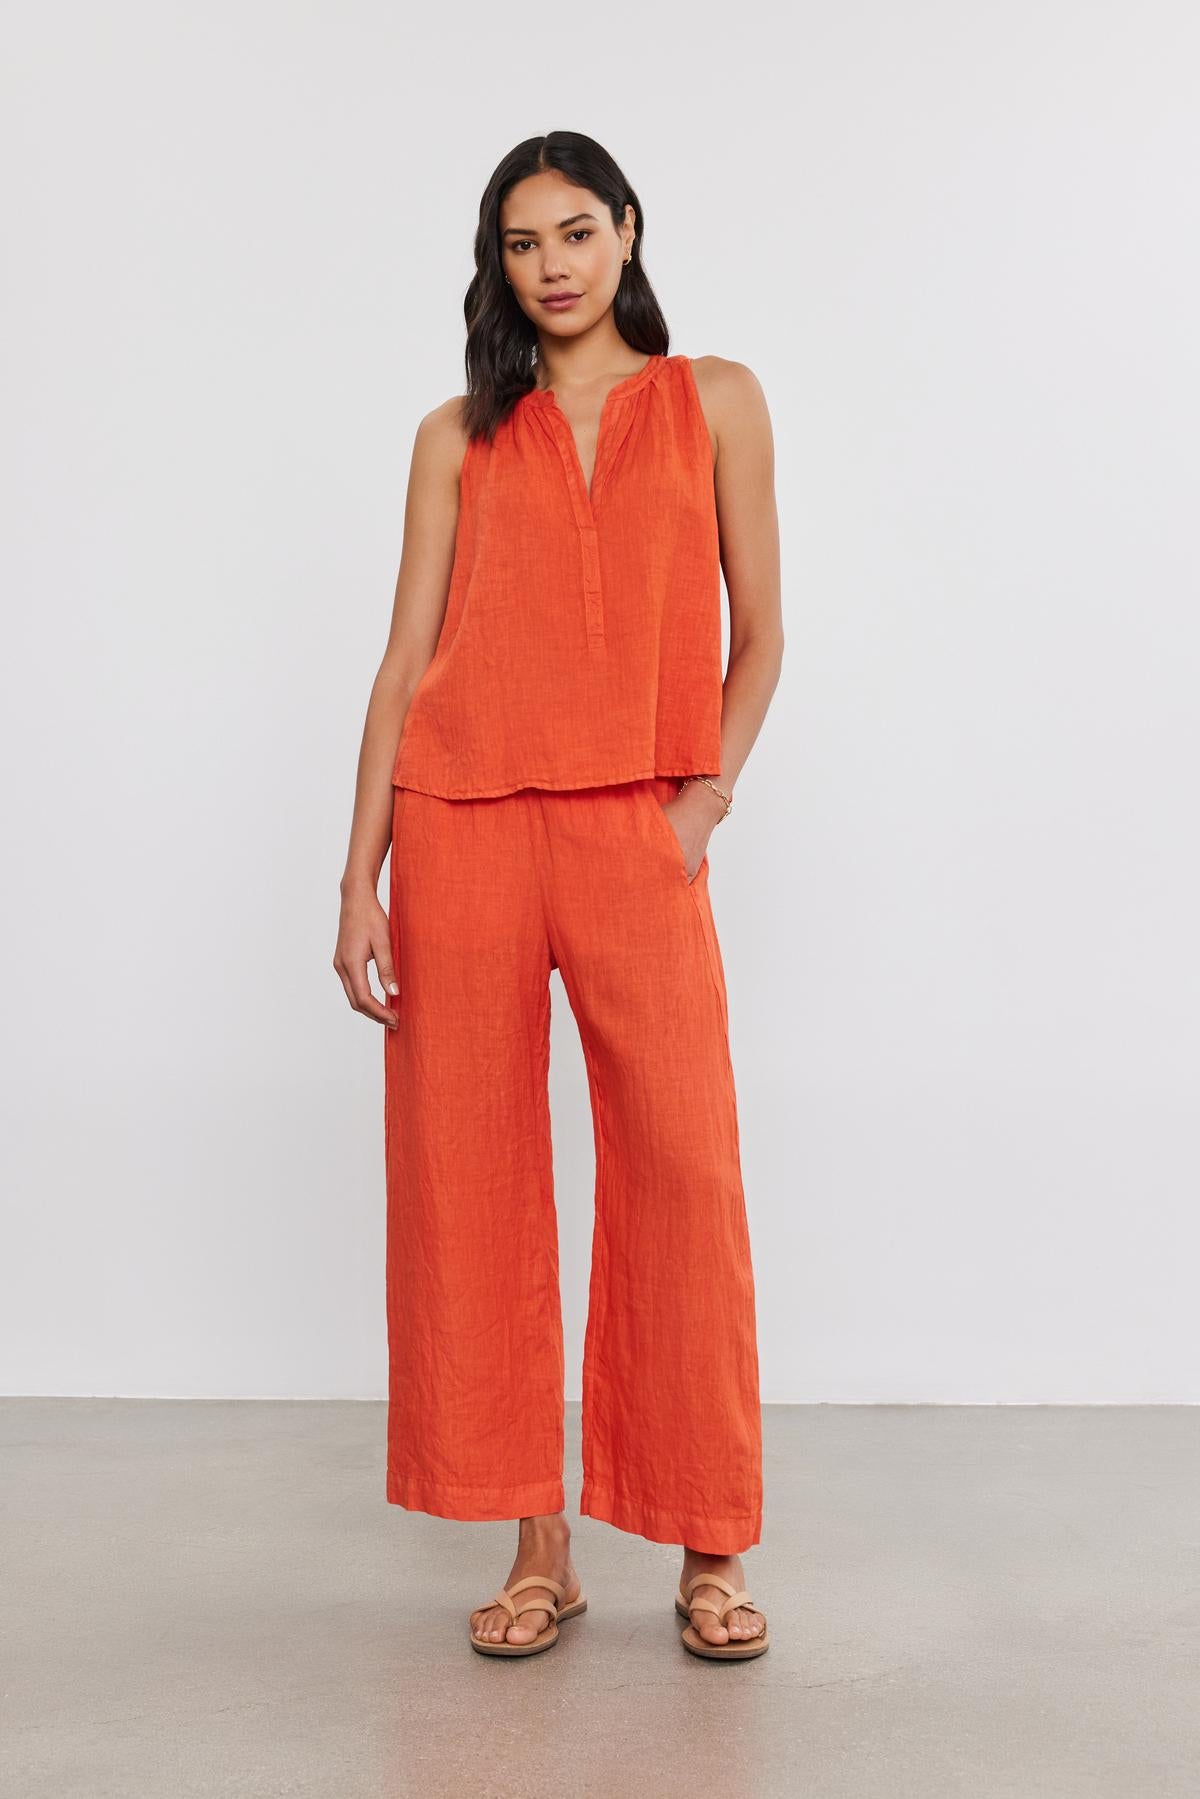   Person is standing against a plain background, wearing an orange sleeveless top and matching LOLA LINEN PANT by Velvet by Graham & Spencer. They are also wearing sandals. 